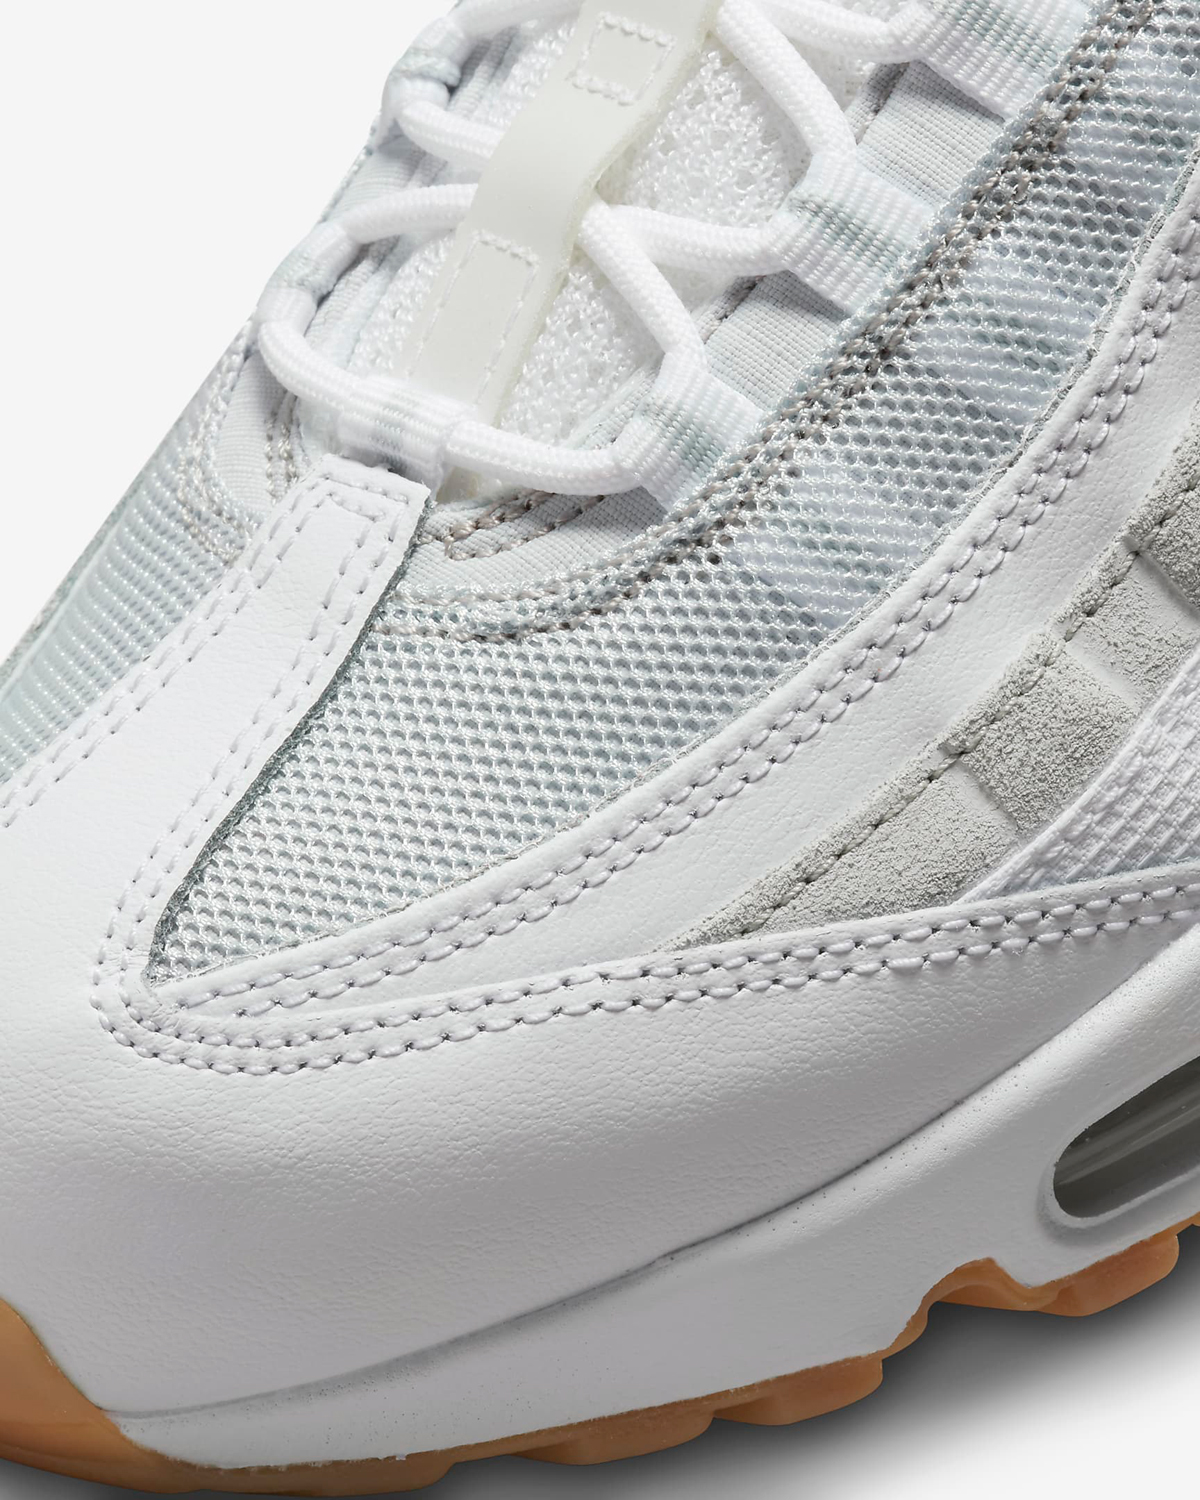 nike-air-max-95-white-pure-platinum-wolf-grey-hot-curry-release-date-7